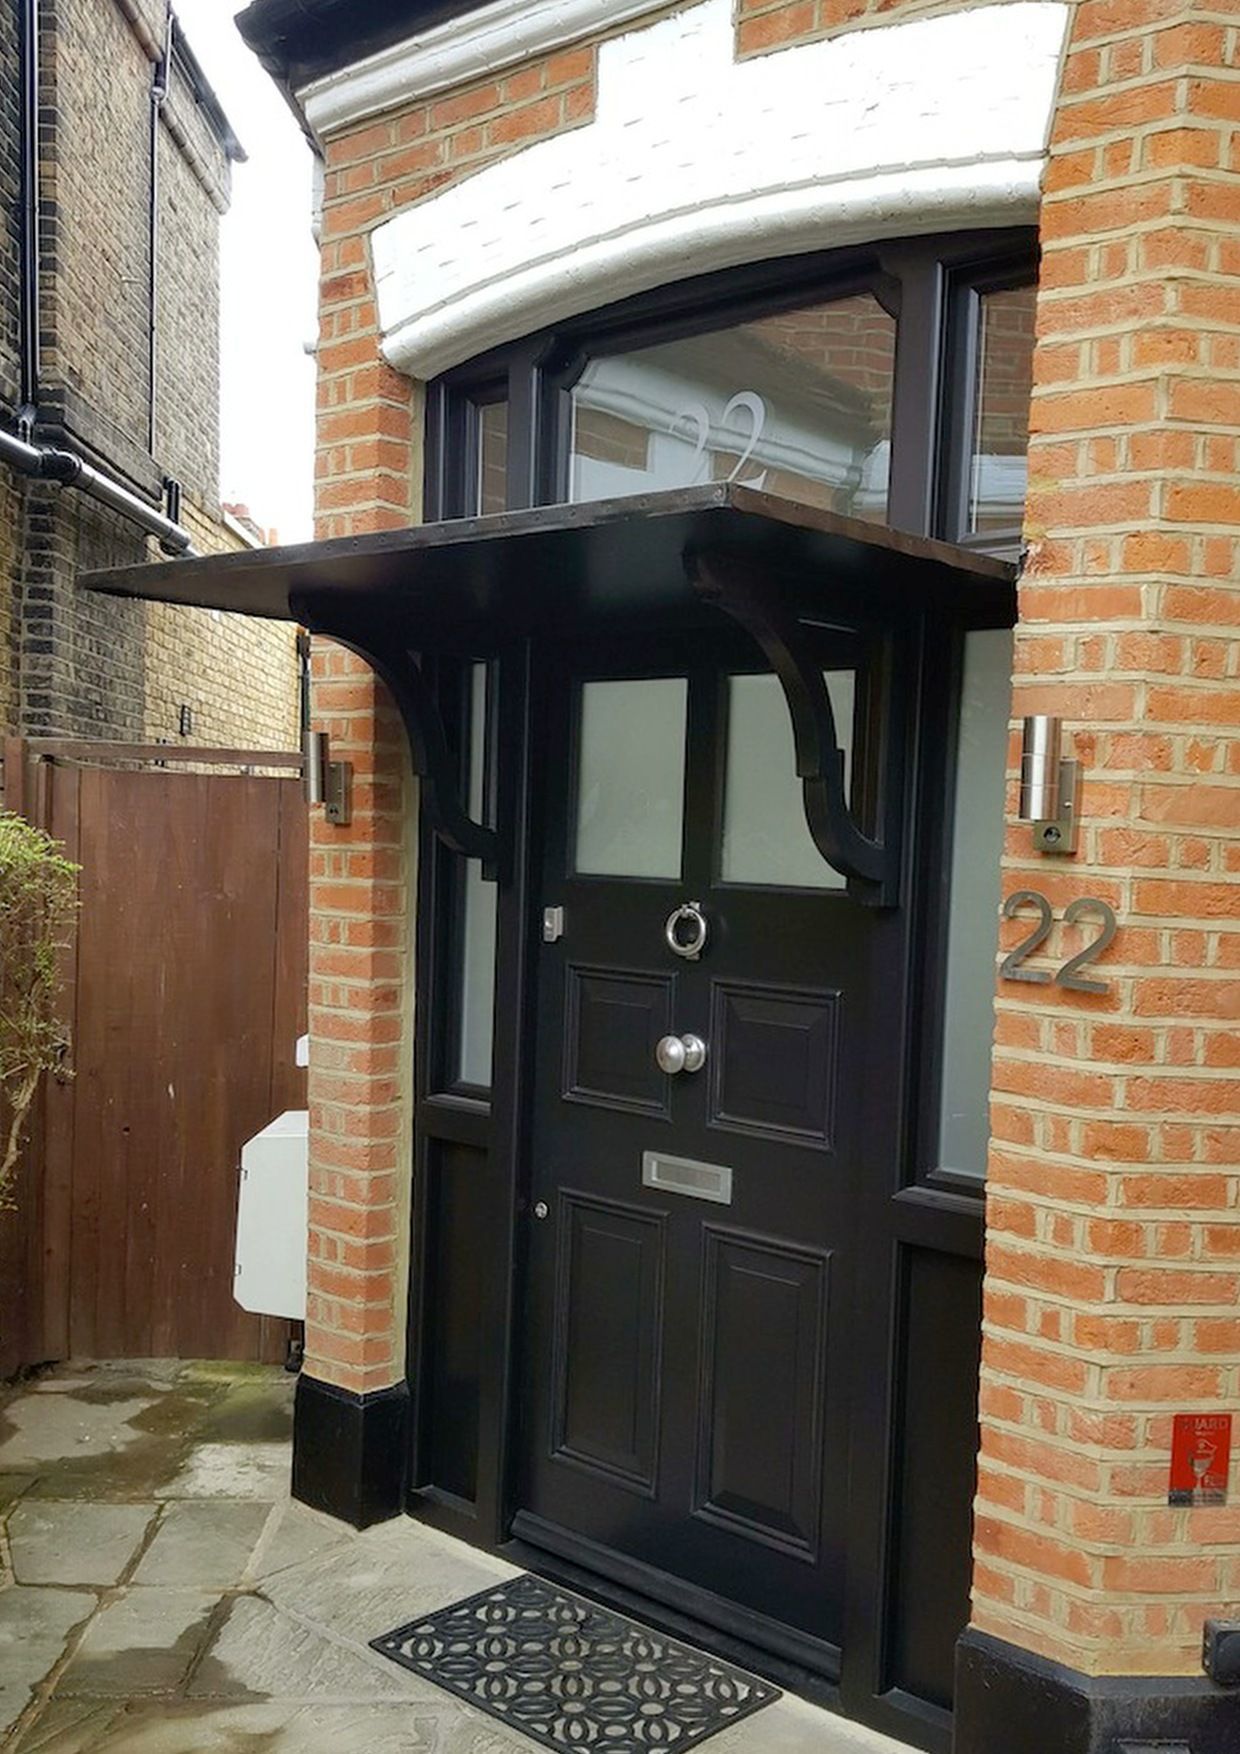 a brick home with an Accoya wood front entry door with the number 22 on it